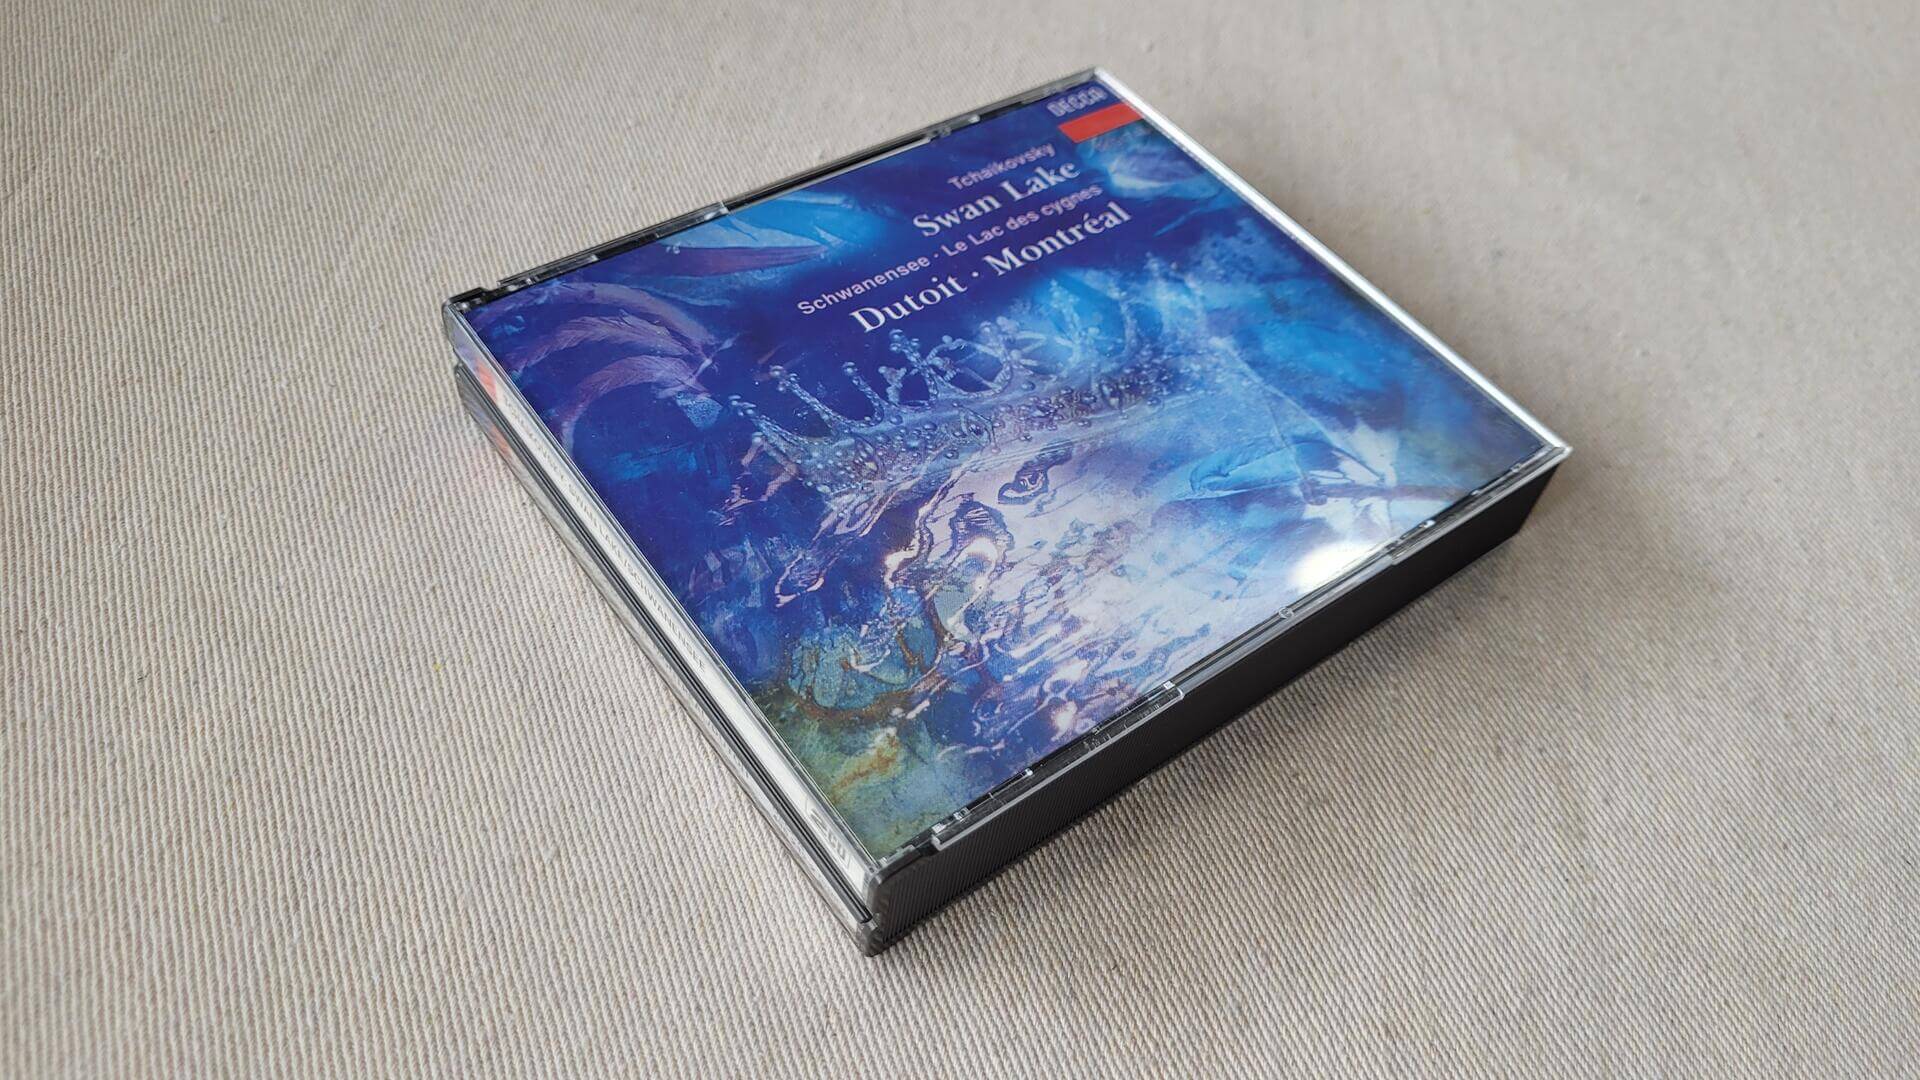 Tchaikovsky Swan Lake 2 classical CD box by Dutoit & Orchestre symphonique de Montréal by Decca in 1992. Great gift and collectible w 40 page booklet